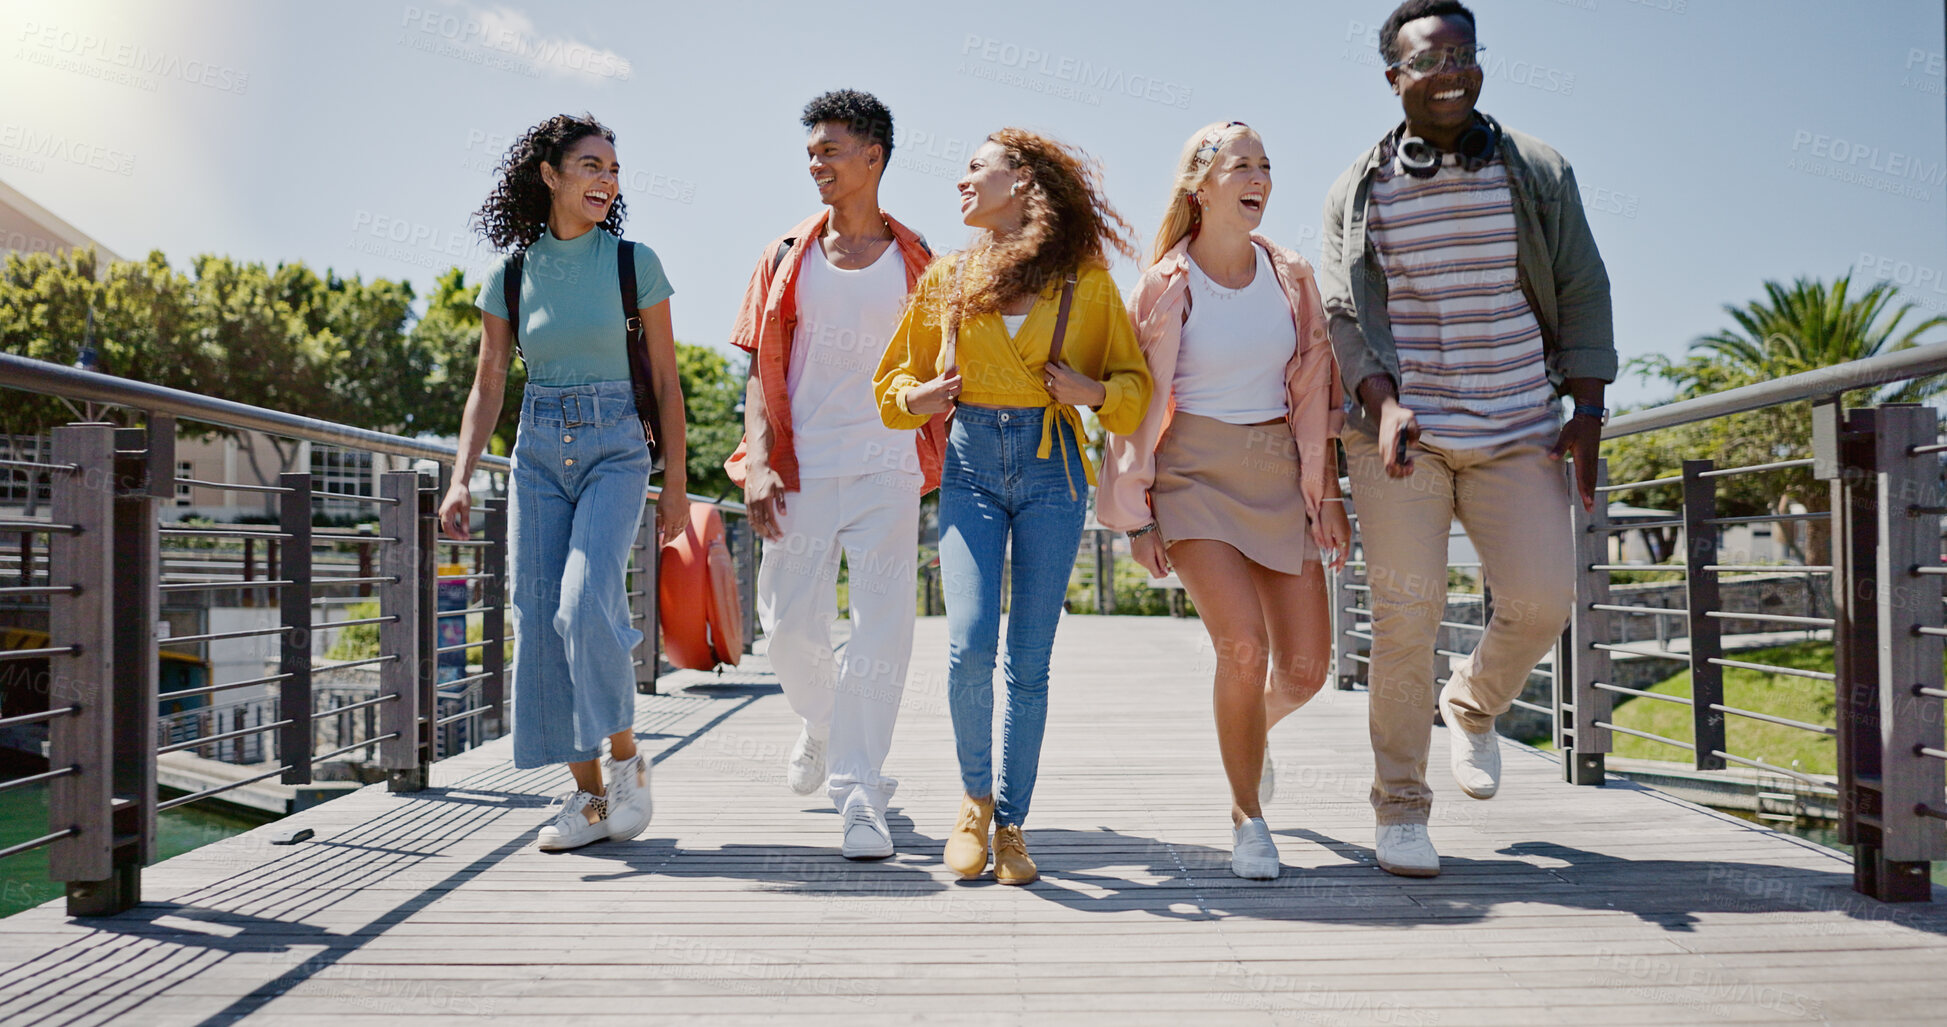 Buy stock photo Walking, conversation and friends at university with fun for learning, bonding and talking. People, diversity and group of gen z students on outdoor bridge ready for education at college campus.